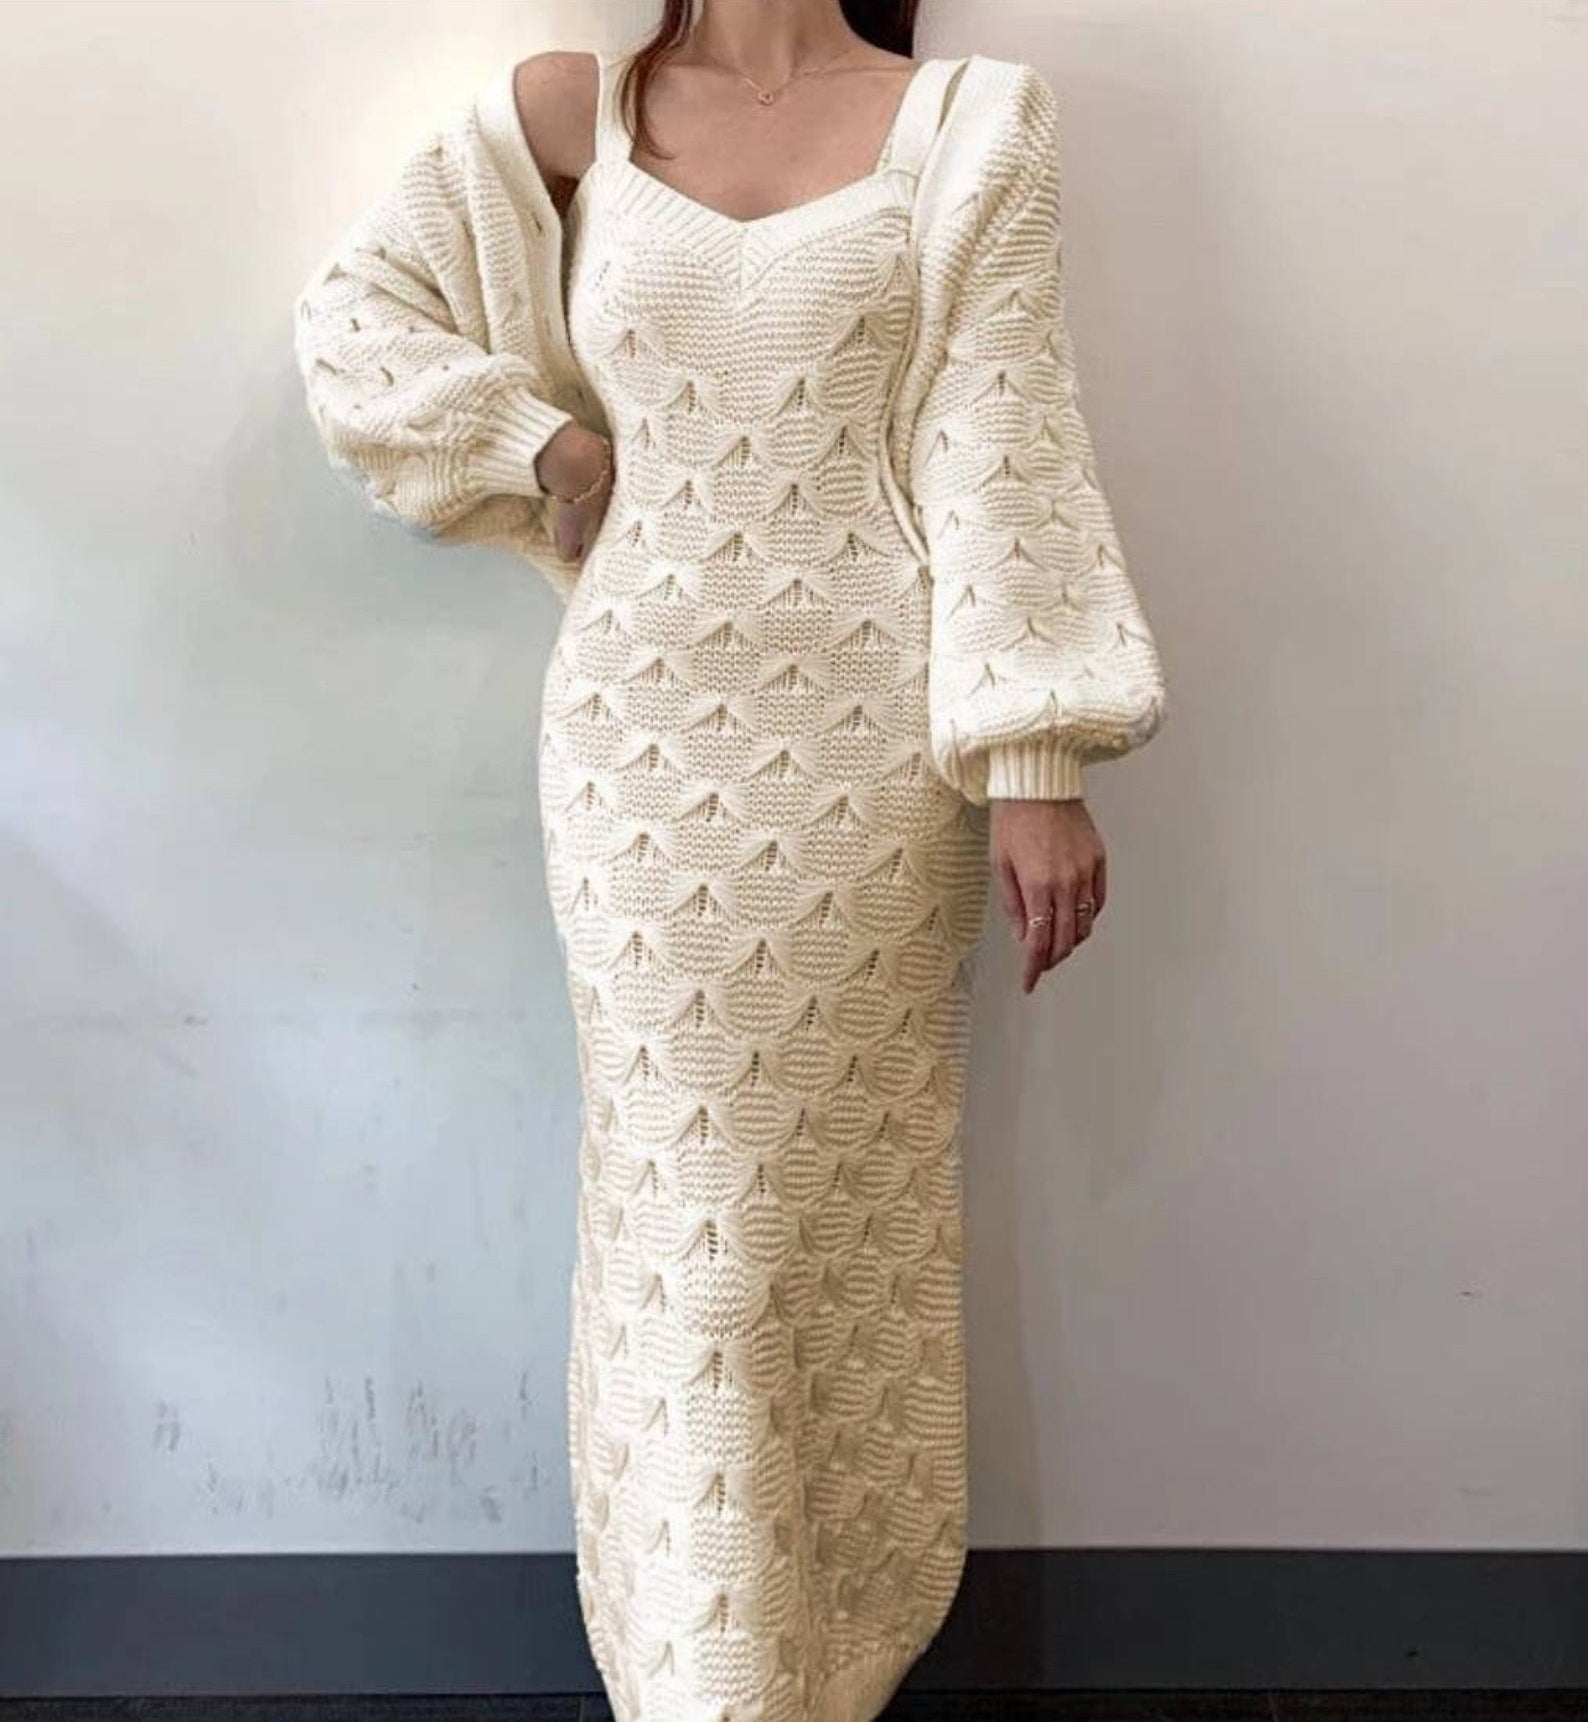 A model wearing the dress and sweater set in white